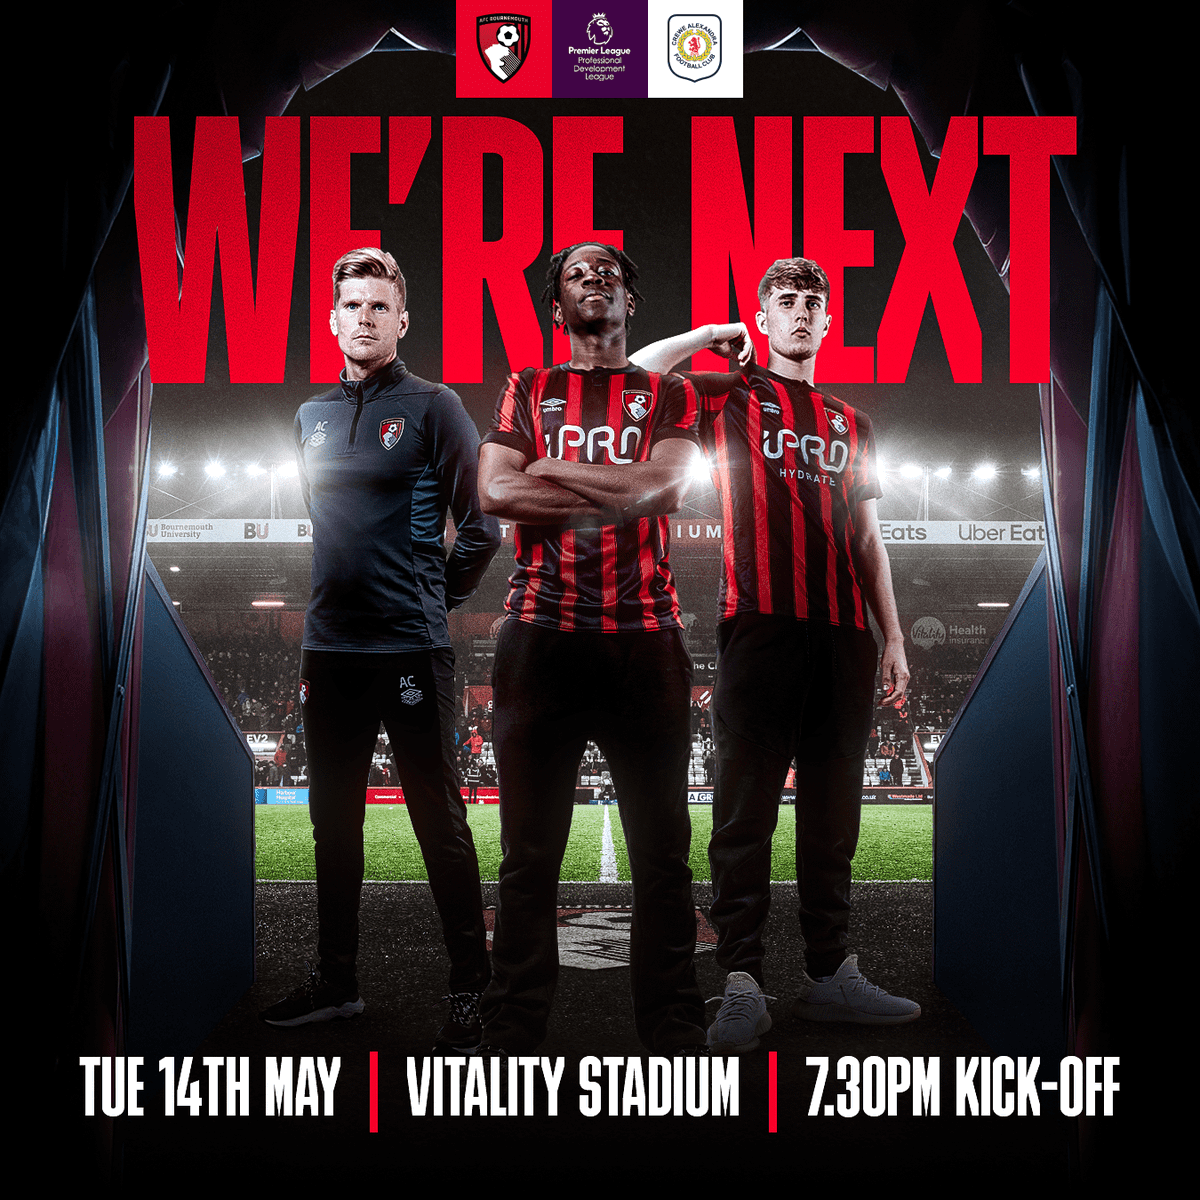 AFC Bournemouth's development squad will host Crewe Alexandra U21s under the lights at Vitality Stadium on Tuesday 14th May at 7.30pm. Tickets are priced from £5 and can be purchased here - bit.ly/43TcPlj Make the most of the group discount! - bit.ly/43Sh2Wx